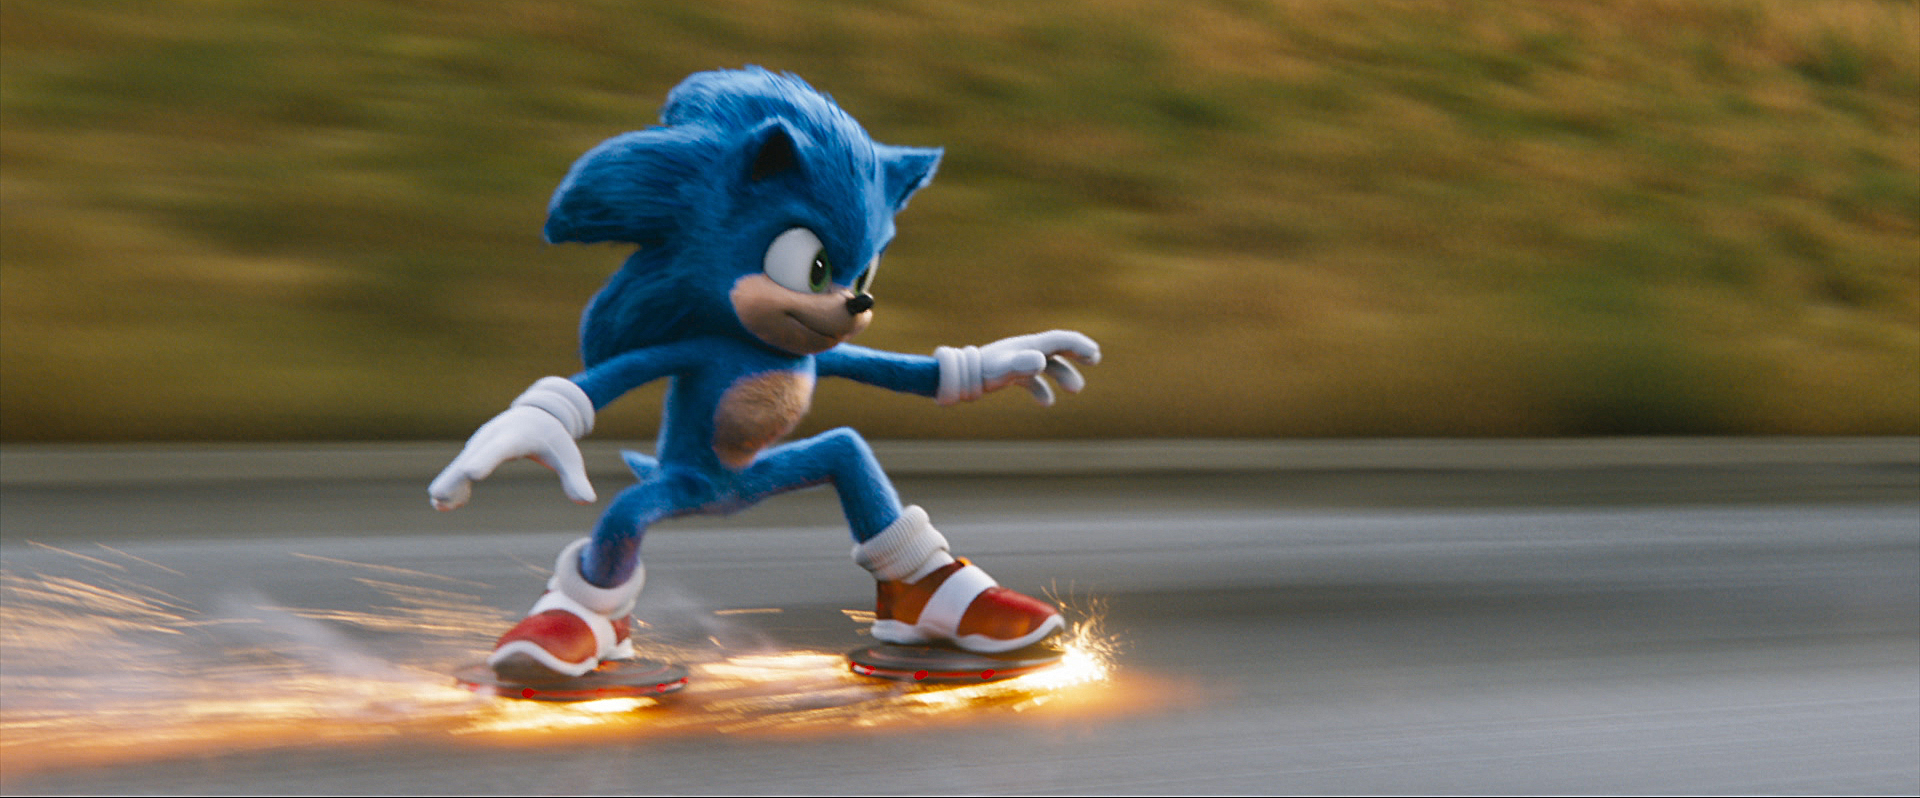 Sonic the Hedgehog at an AMC Theatre near you.